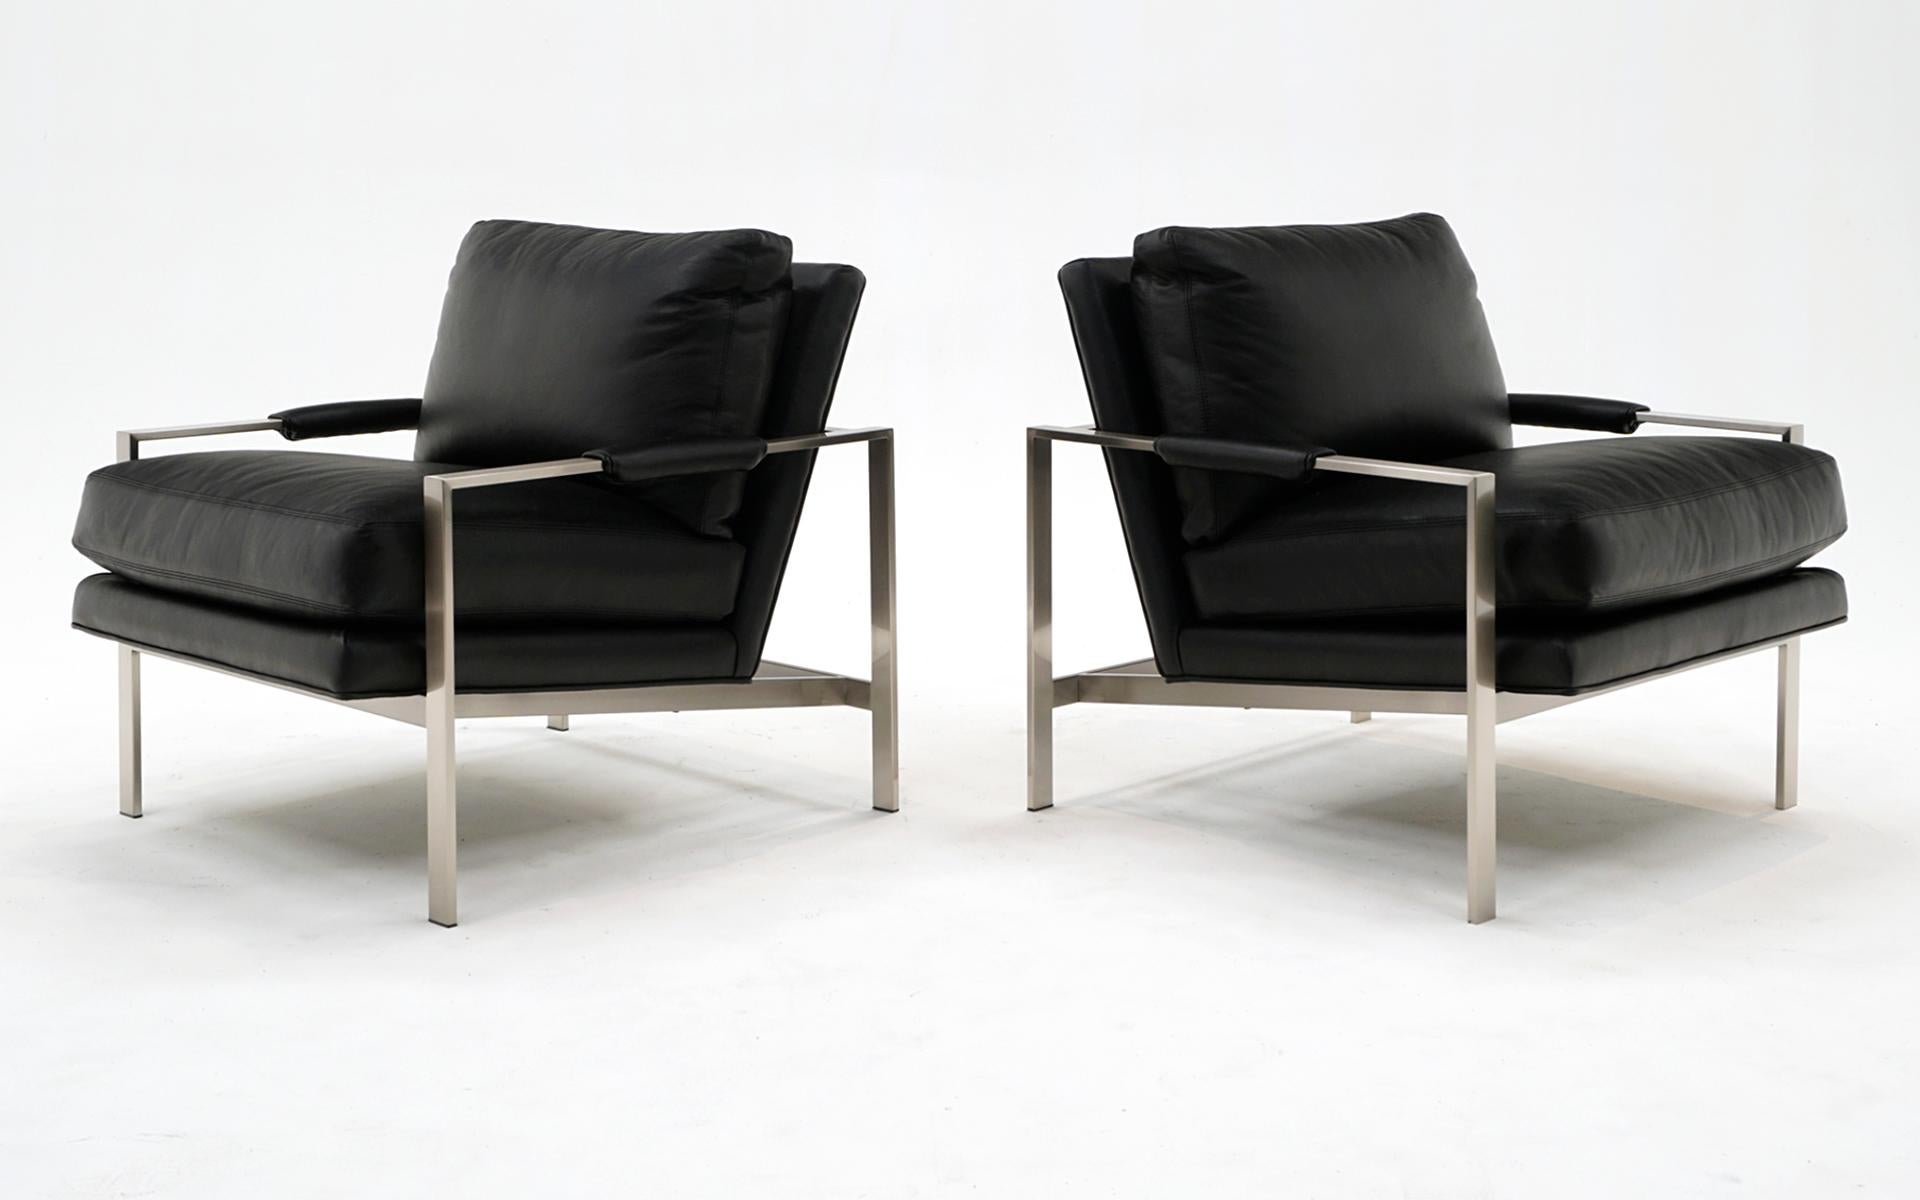 American Pair of Milo Baughman Black Leather & Brushed Steel Lounge Chairs. Signed